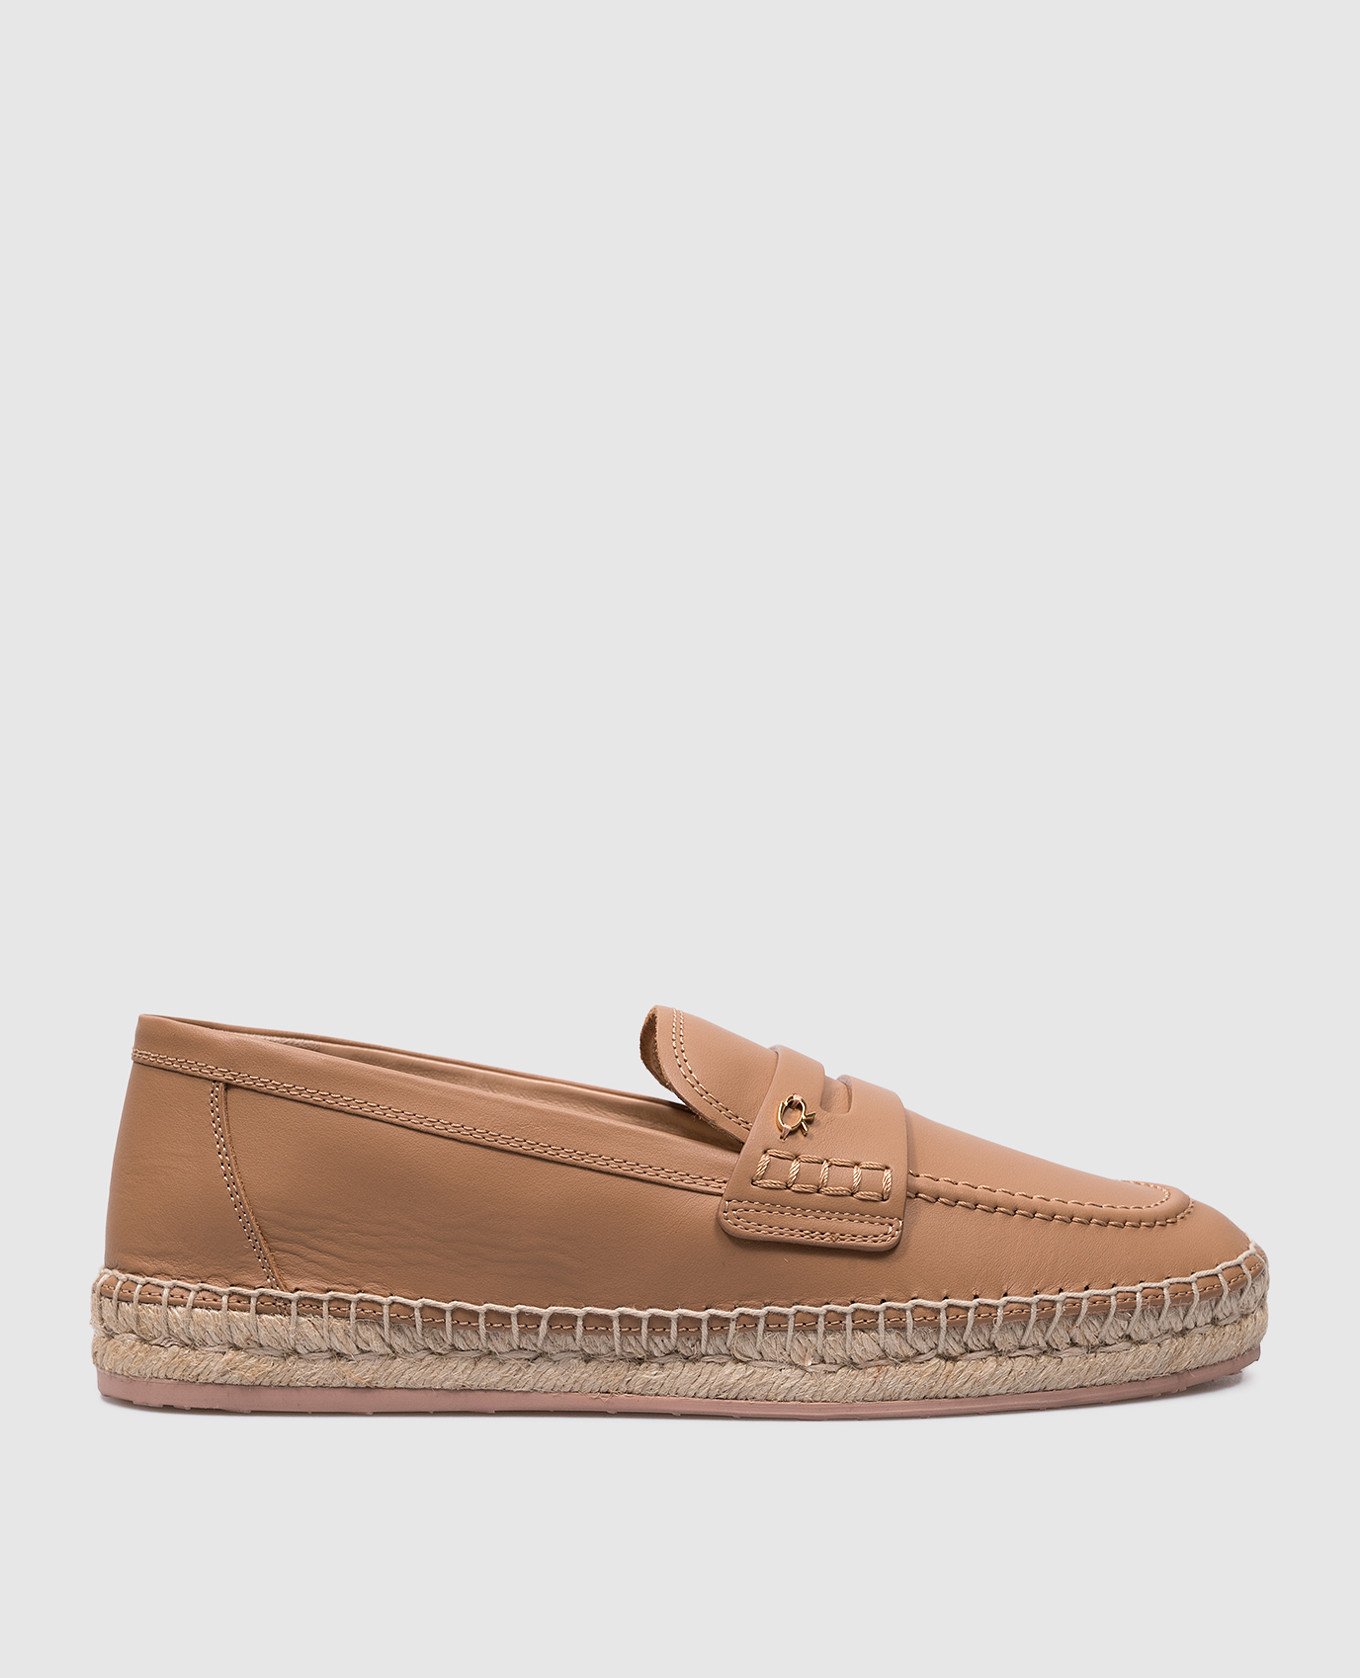 Lido brown leather espadrilles